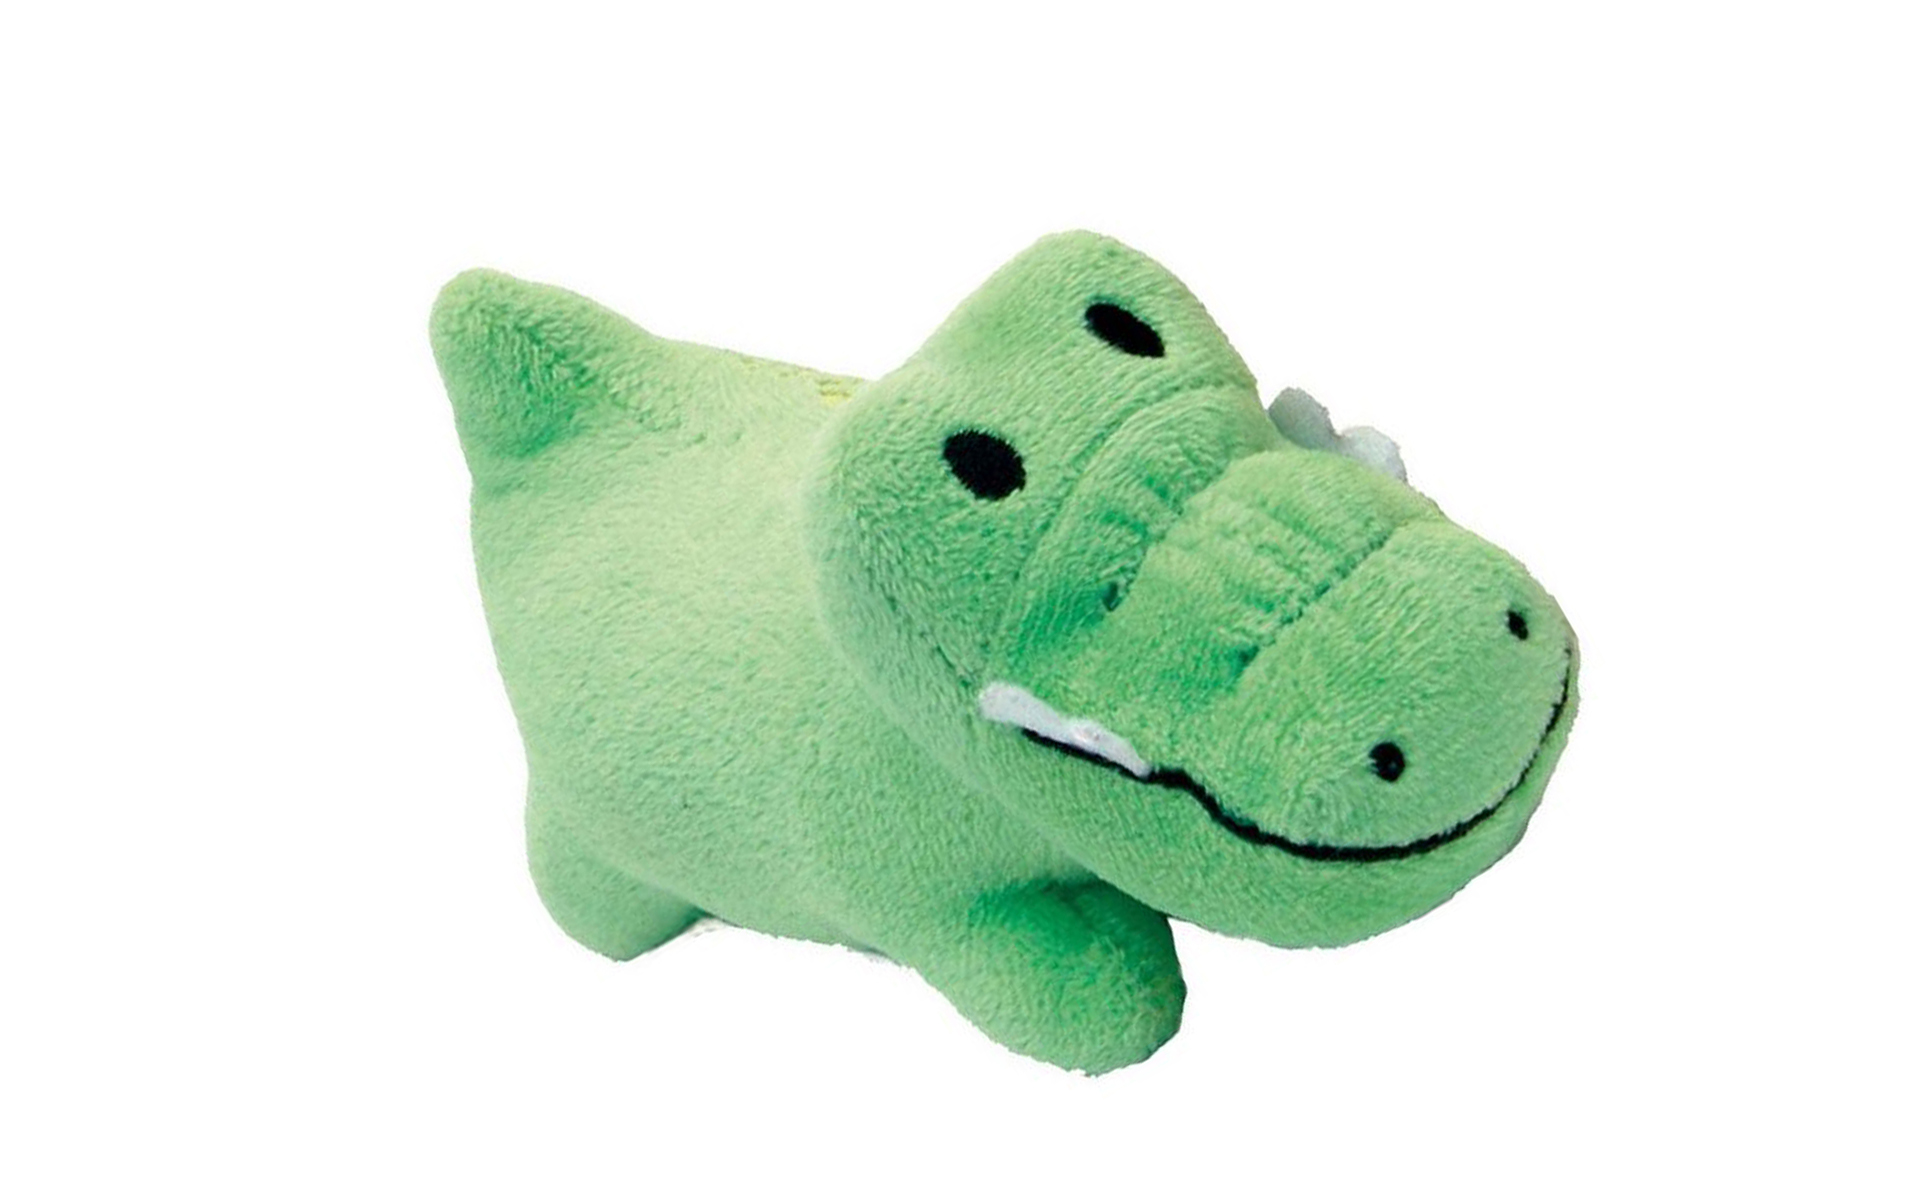 Ultra Soft Plush Gator Squeaker Toy, 1 count (4.5"L)